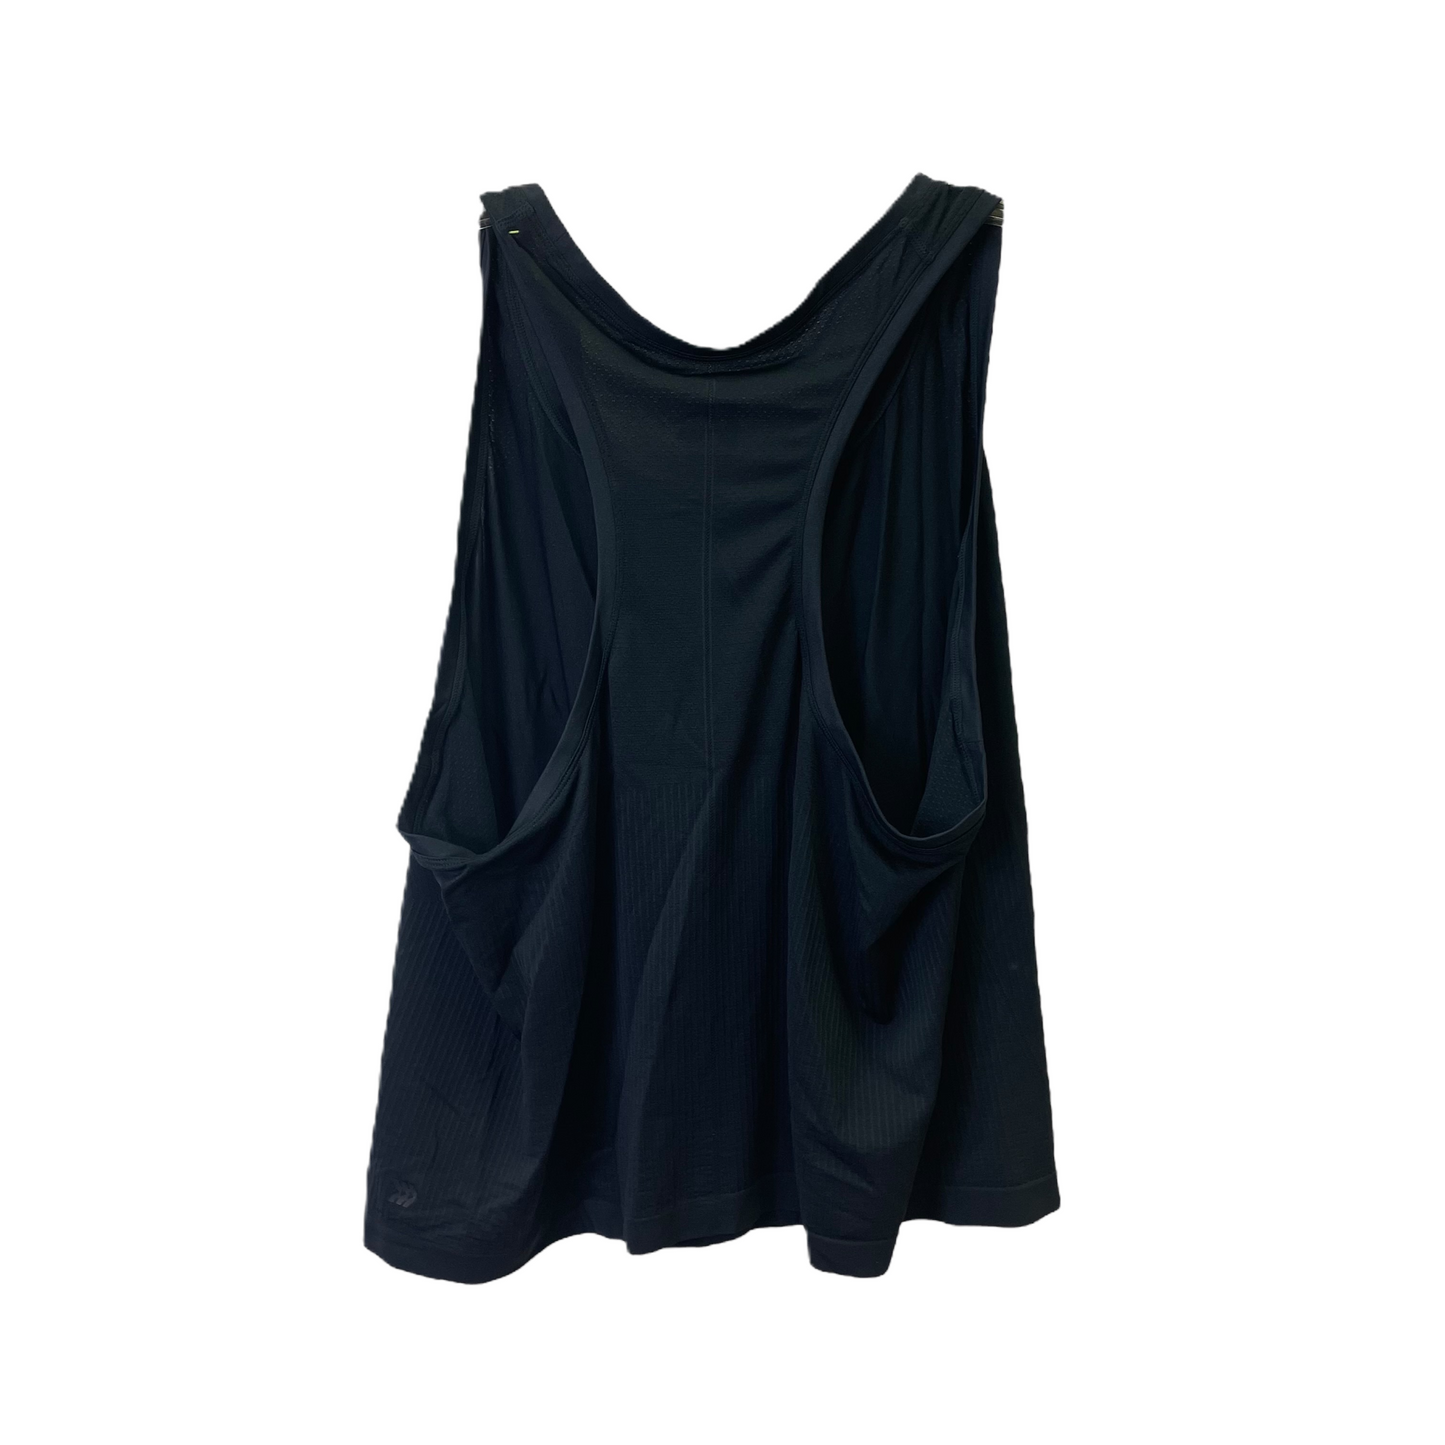 Black Athletic Tank Top By All In Motion, Size: 1x